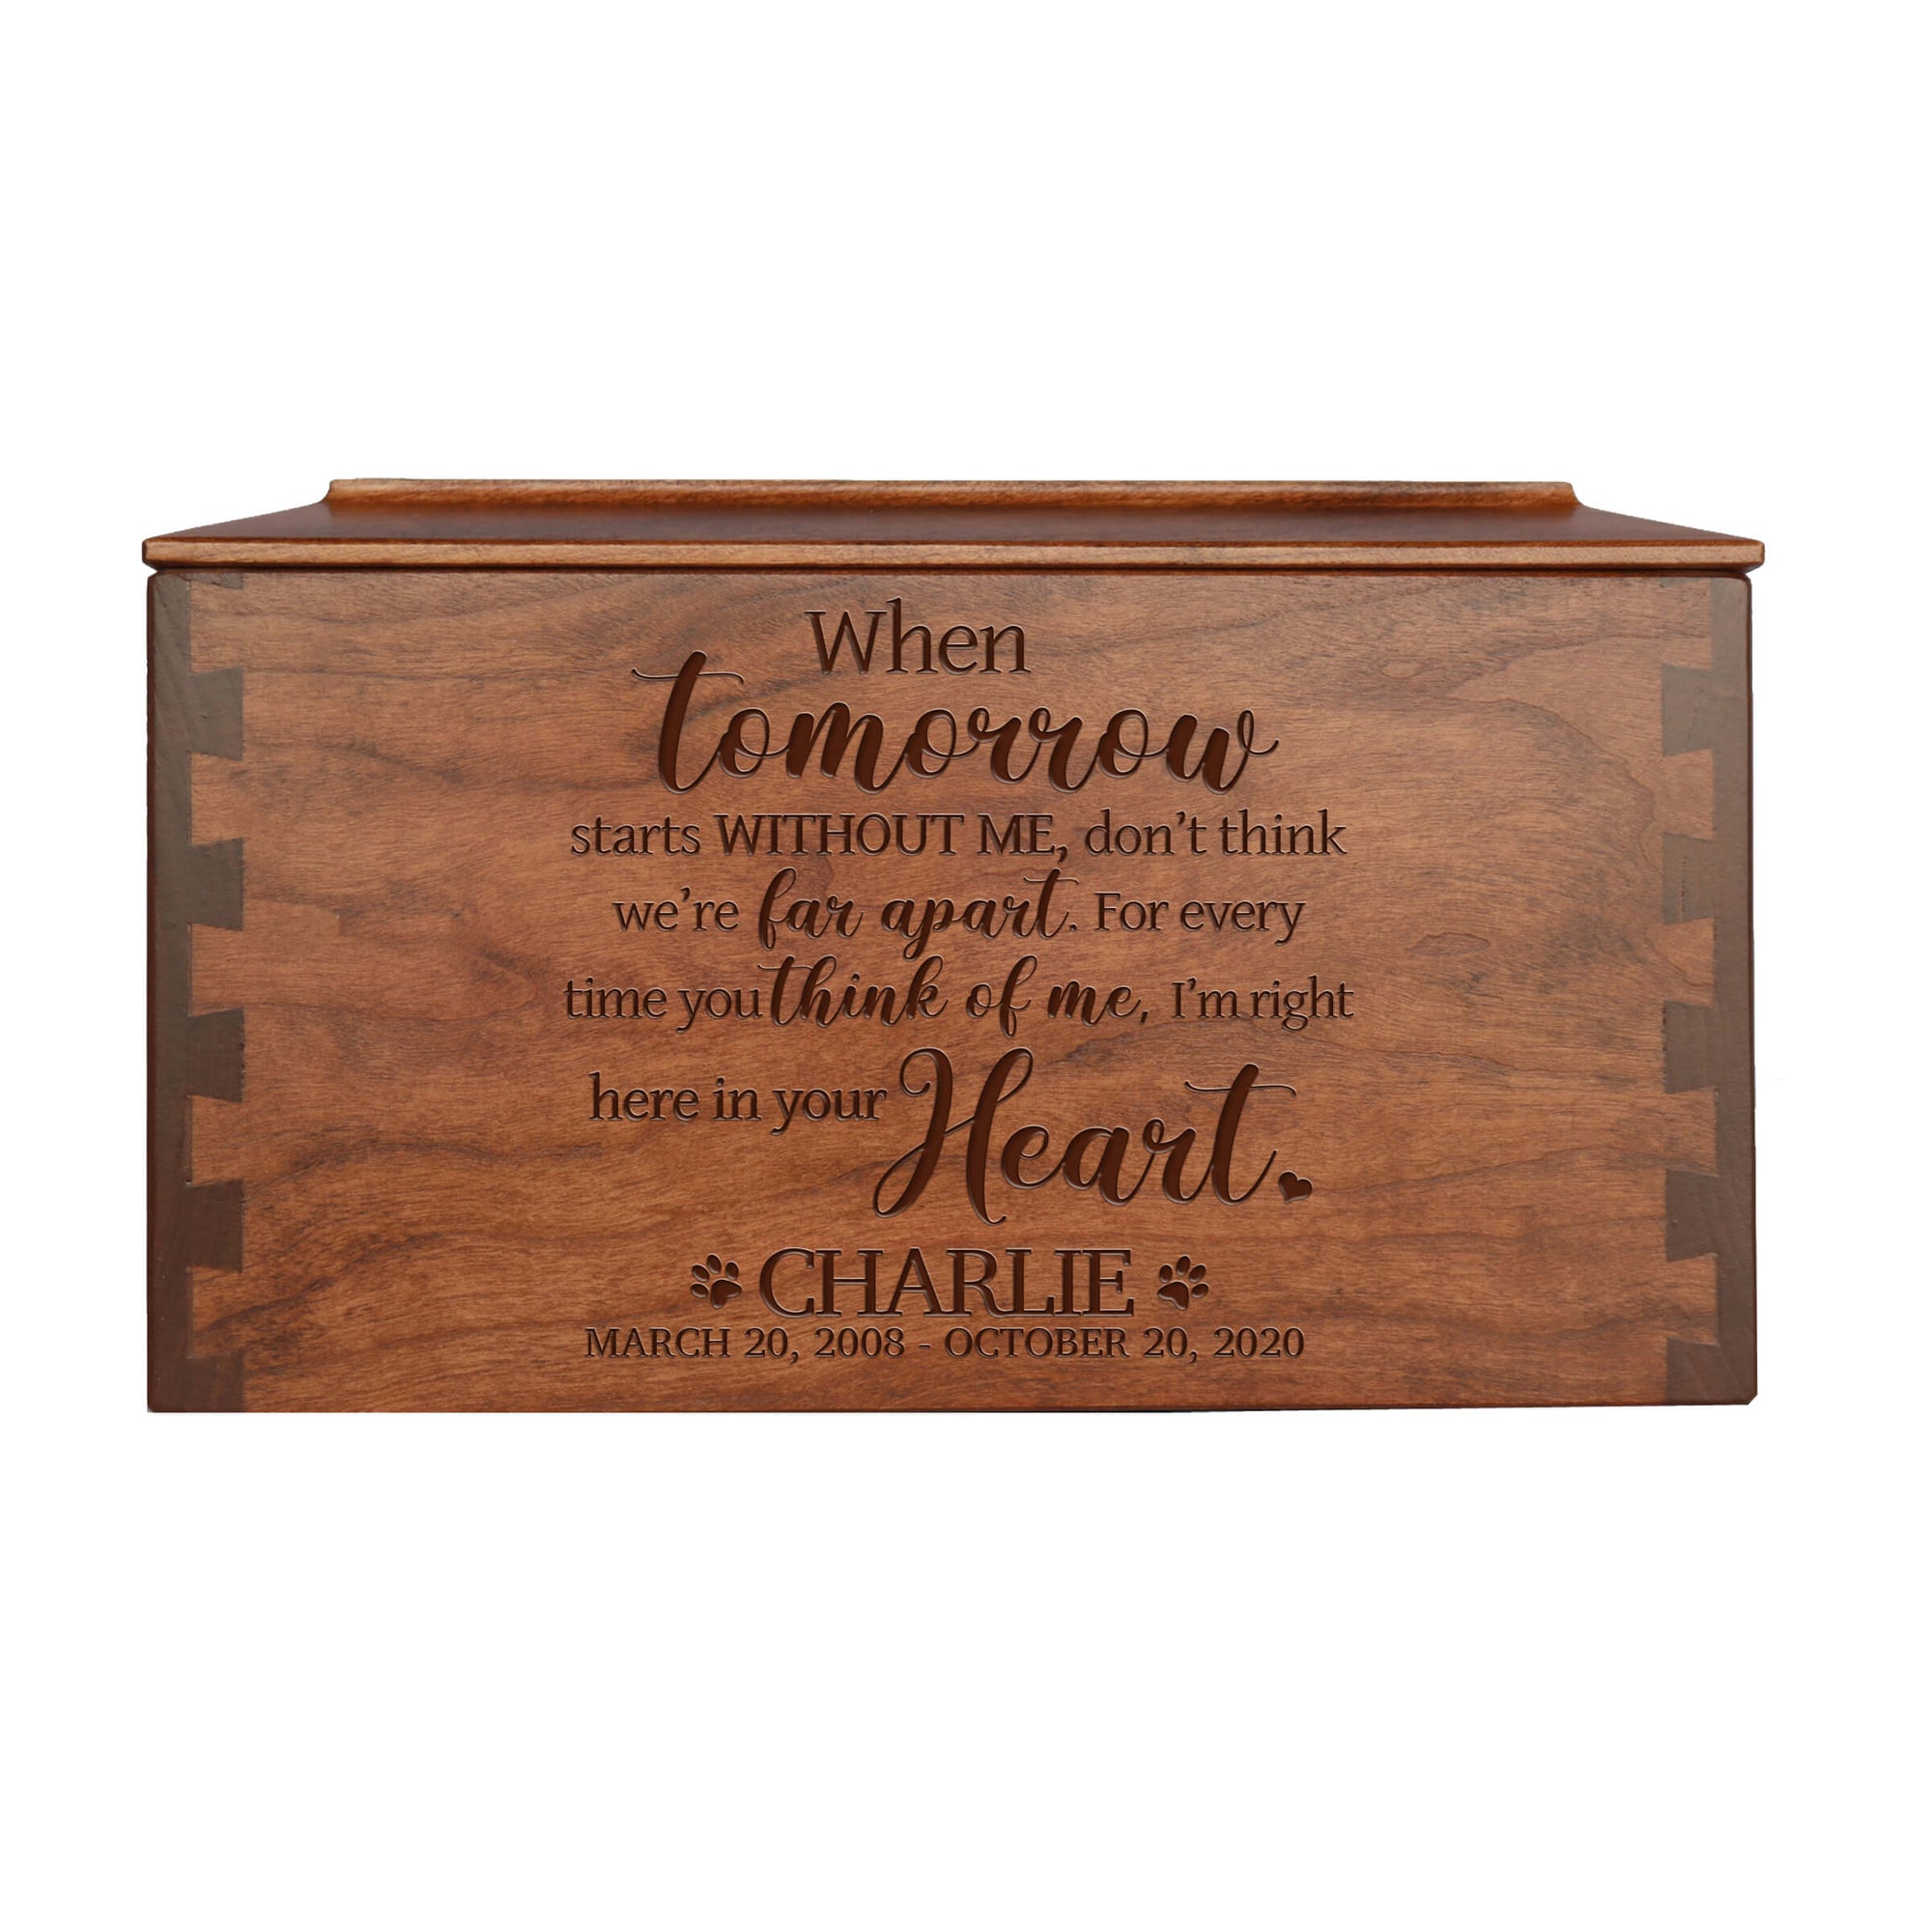 Pet Memorial Dovetail Cremation Urn Box for Dog or Cat - When Tomorrow Starts Without Me